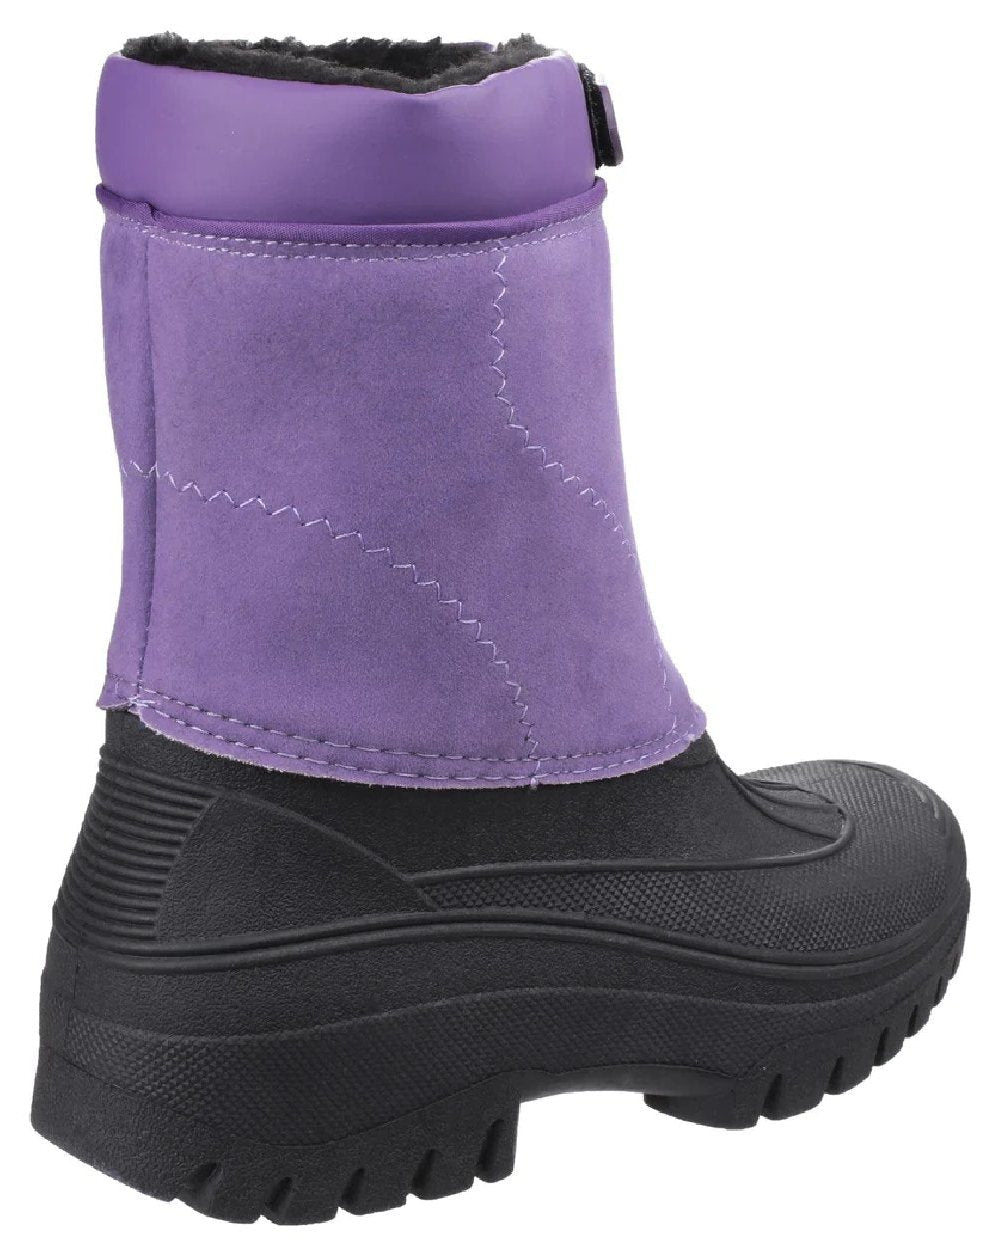 Purple coloured Cotswold Womens Venture Waterproof Winter Boots on white background 